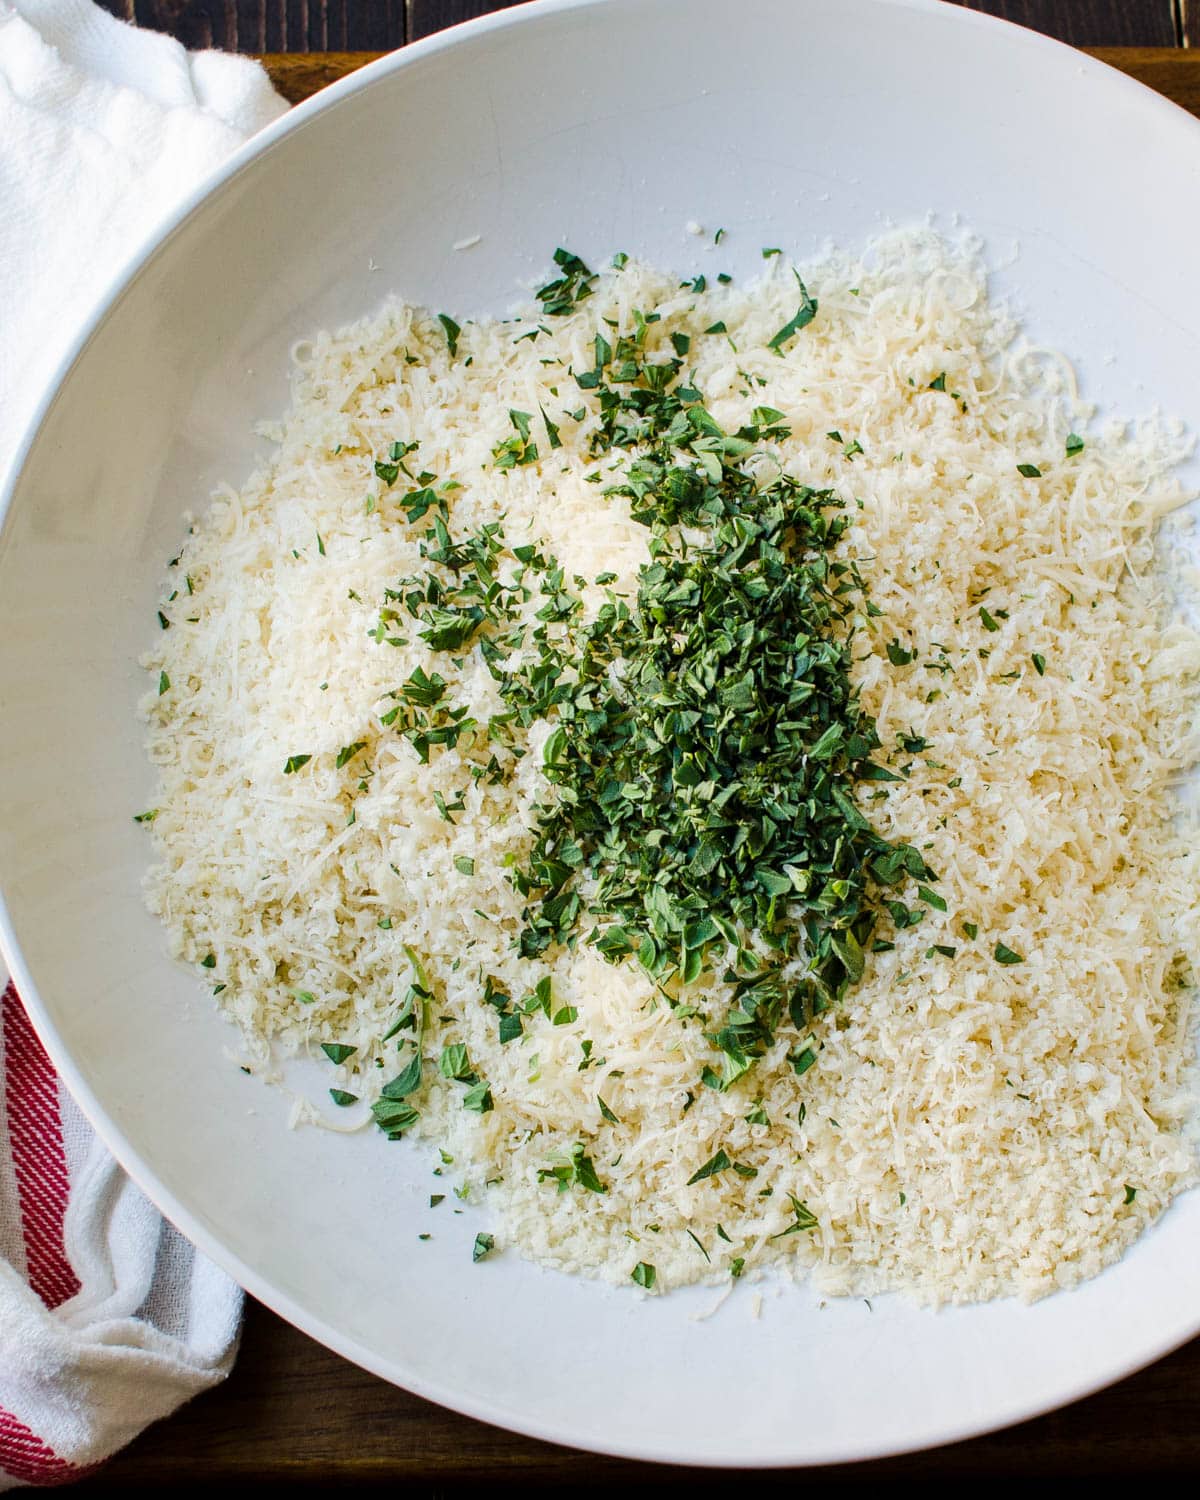 Breadcrumbs, cheese and fresh oregano in a bowl for the oyster crust.